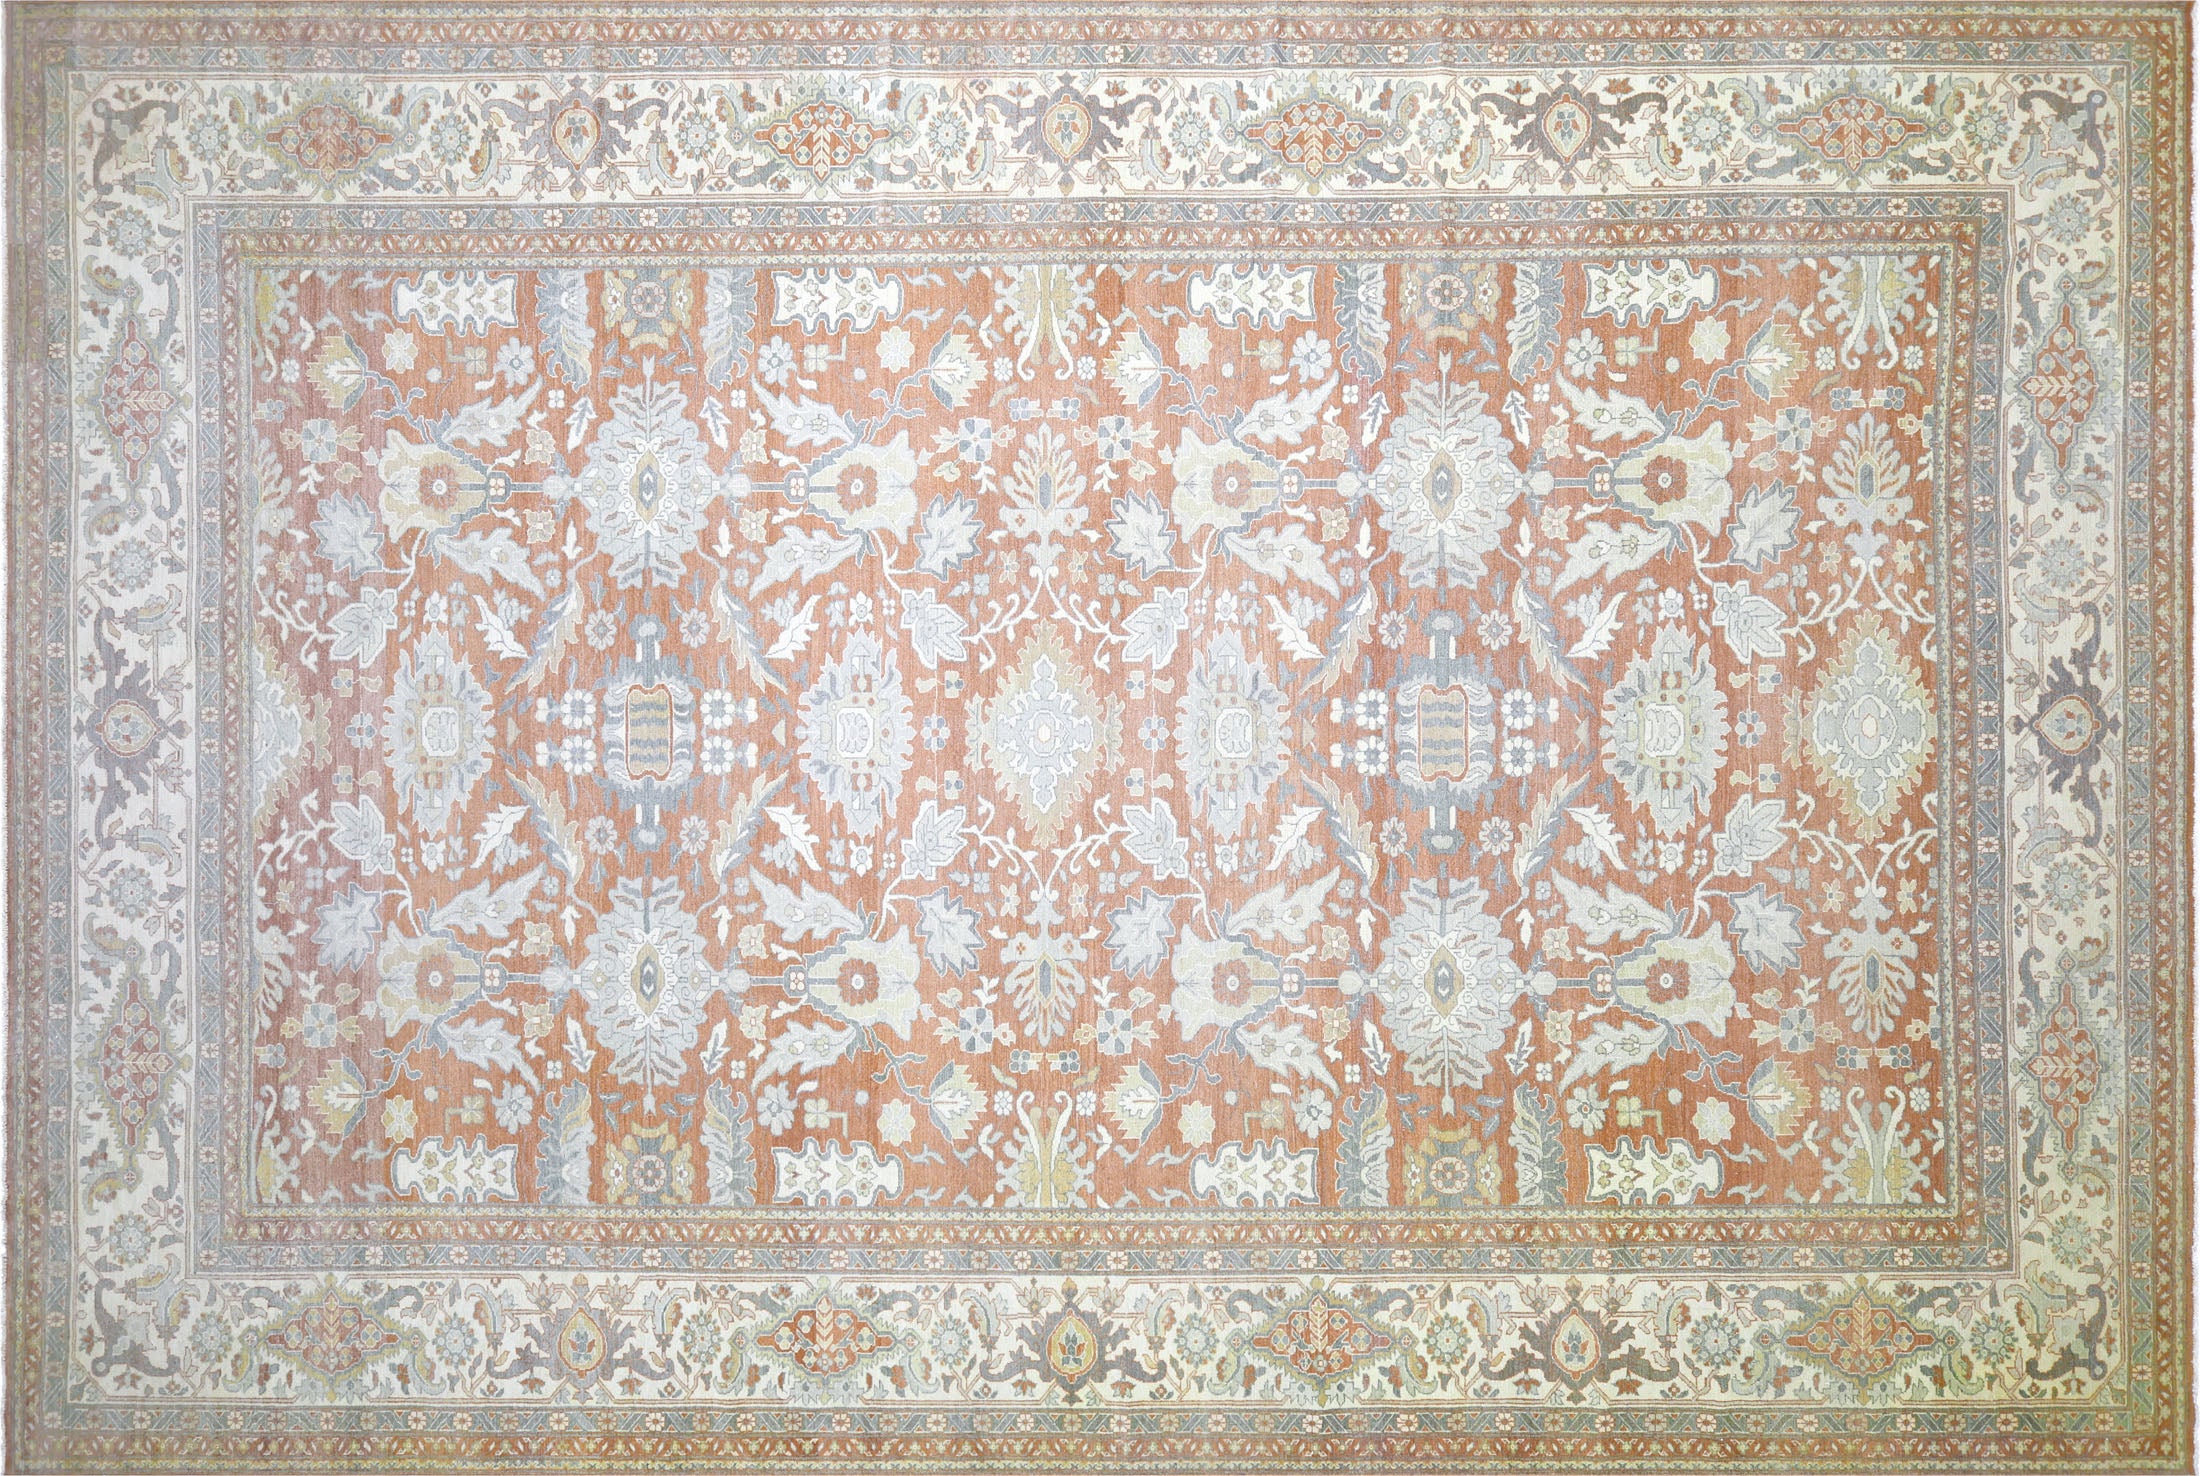 Recently Woven Egyptian Sultanabad Carpet - 13'1" x 19'4"